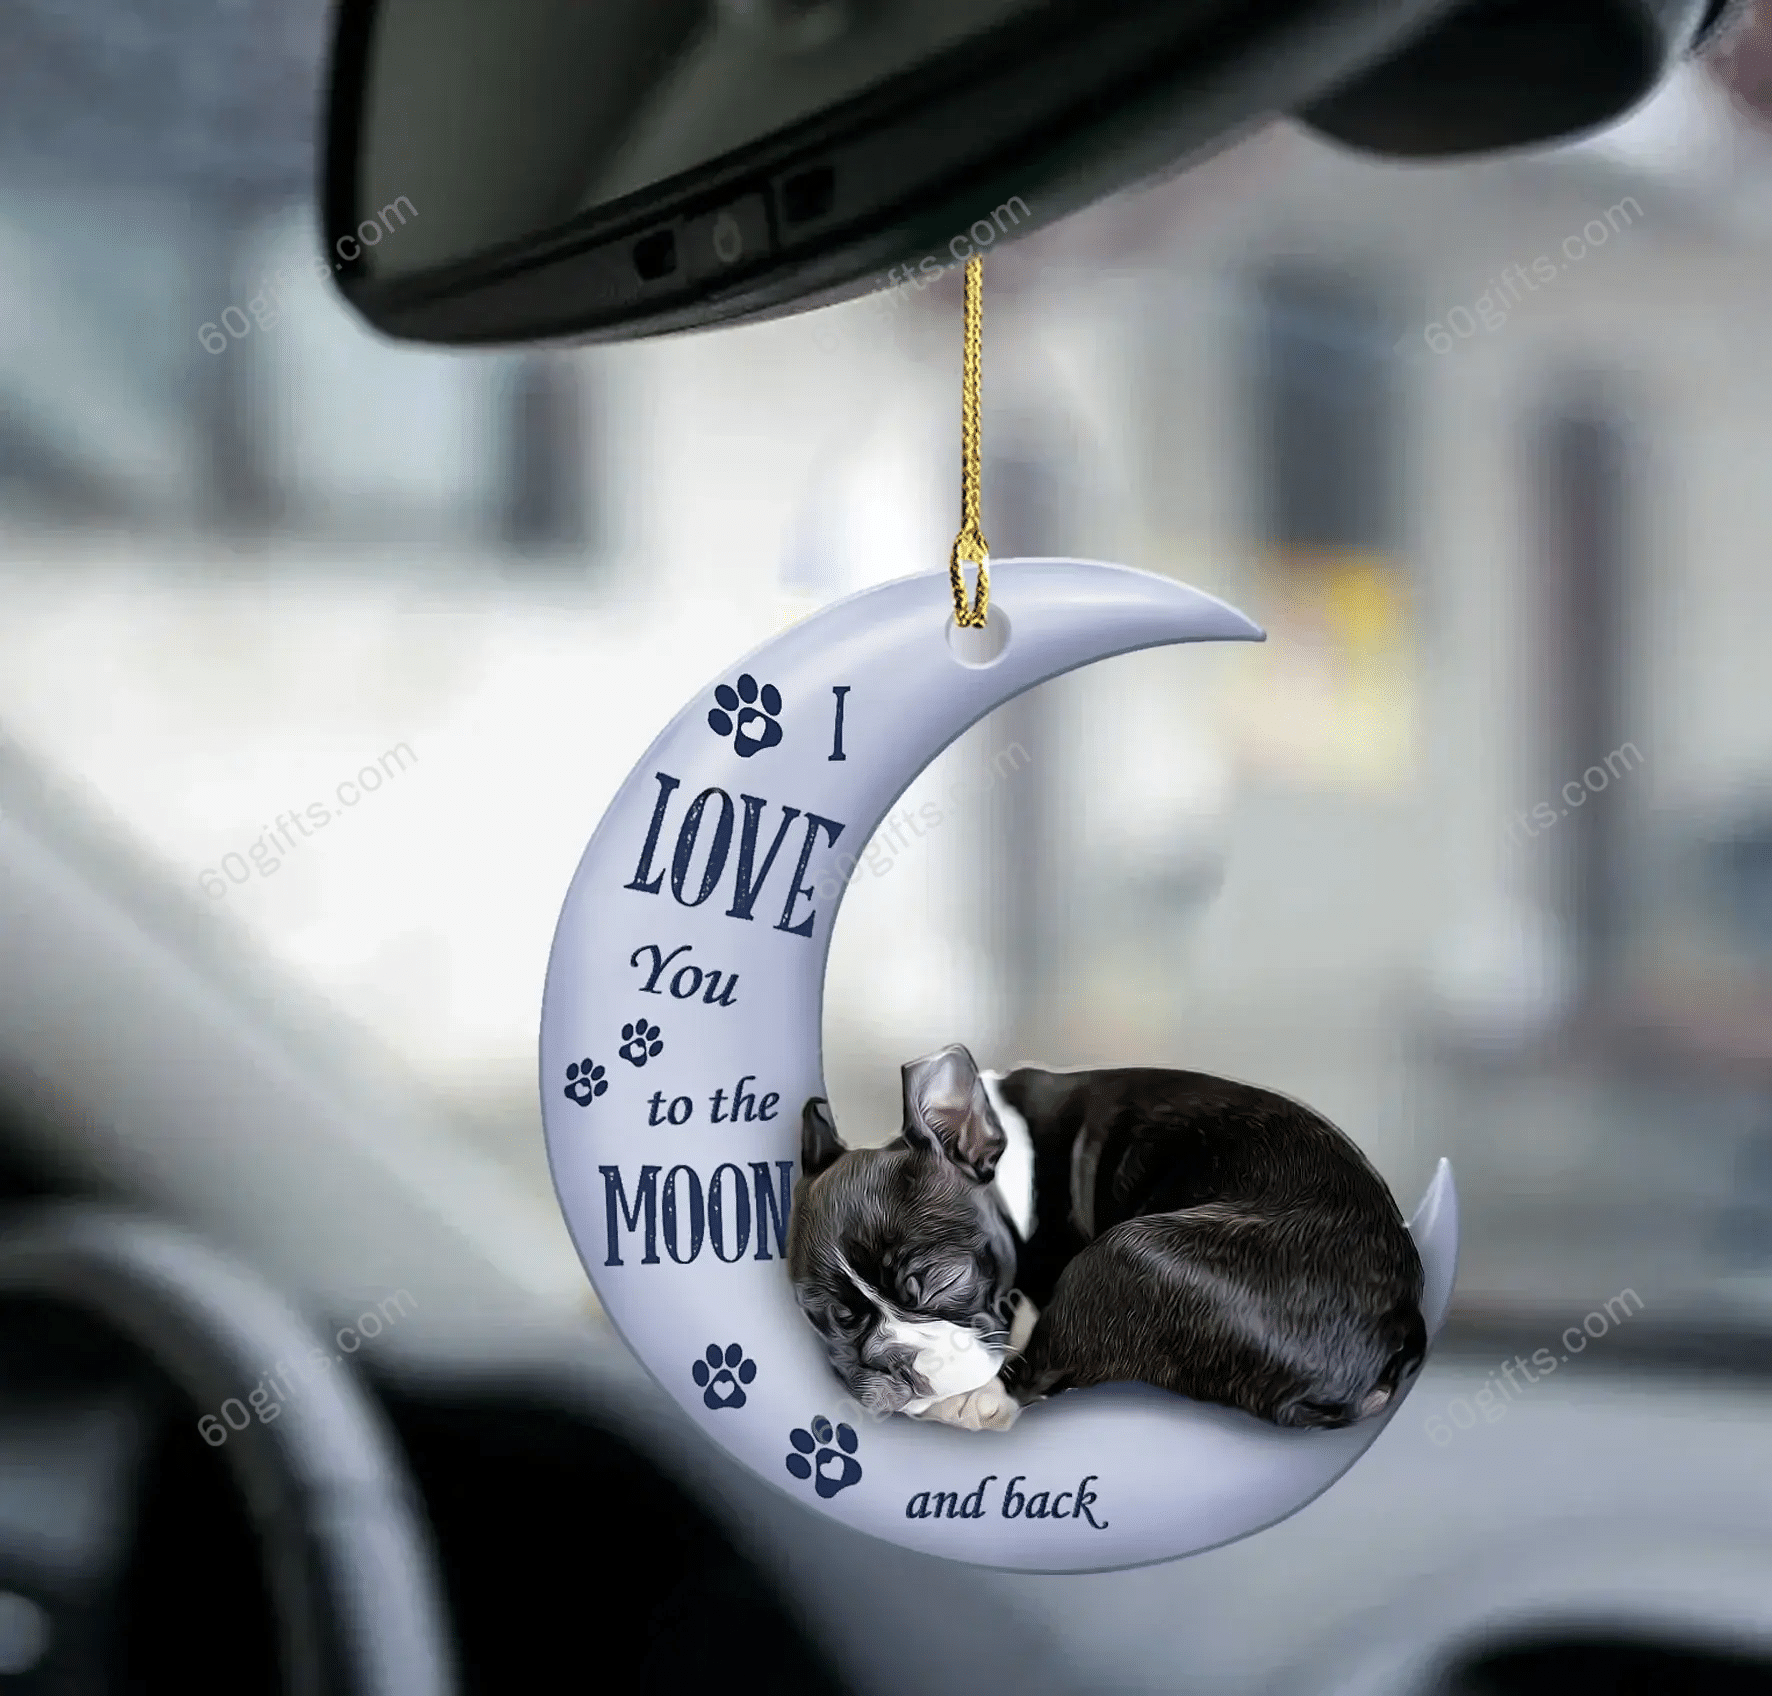 Personalized Name Ornament Boston Terrier I Love You To The Moon & Back - Christmas Gift For Family, For Her, Gift For Him, Gift For Pets Lover Two Sided Ornament